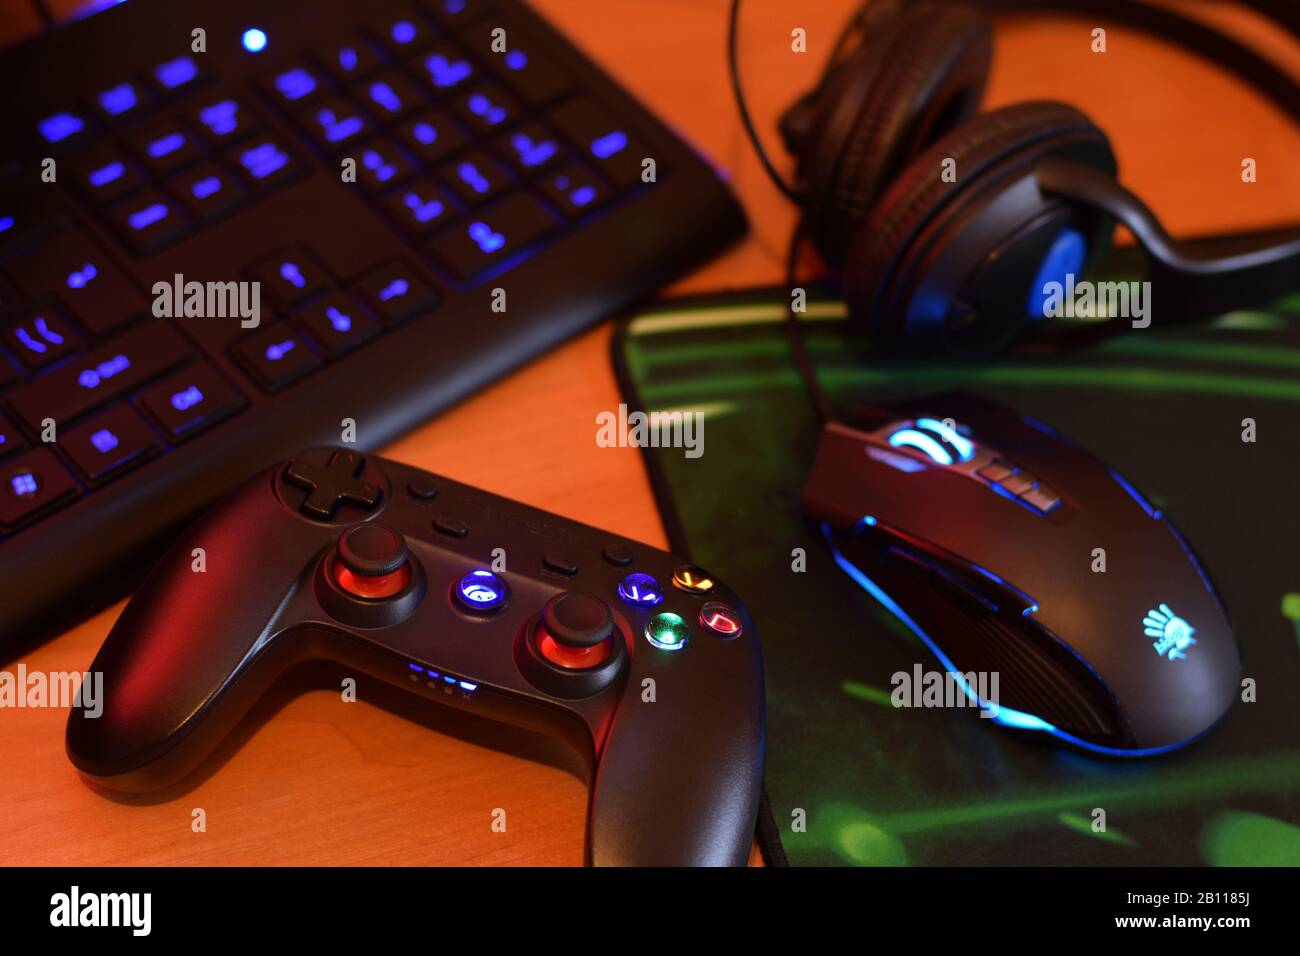 KHARKOV, UKRAINE - JANUARY 19, 2020: Gamesir g3s video game controller and  Bloody p93 gaming mouse on office table with a4tech keyboard and headphones  Stock Photo - Alamy